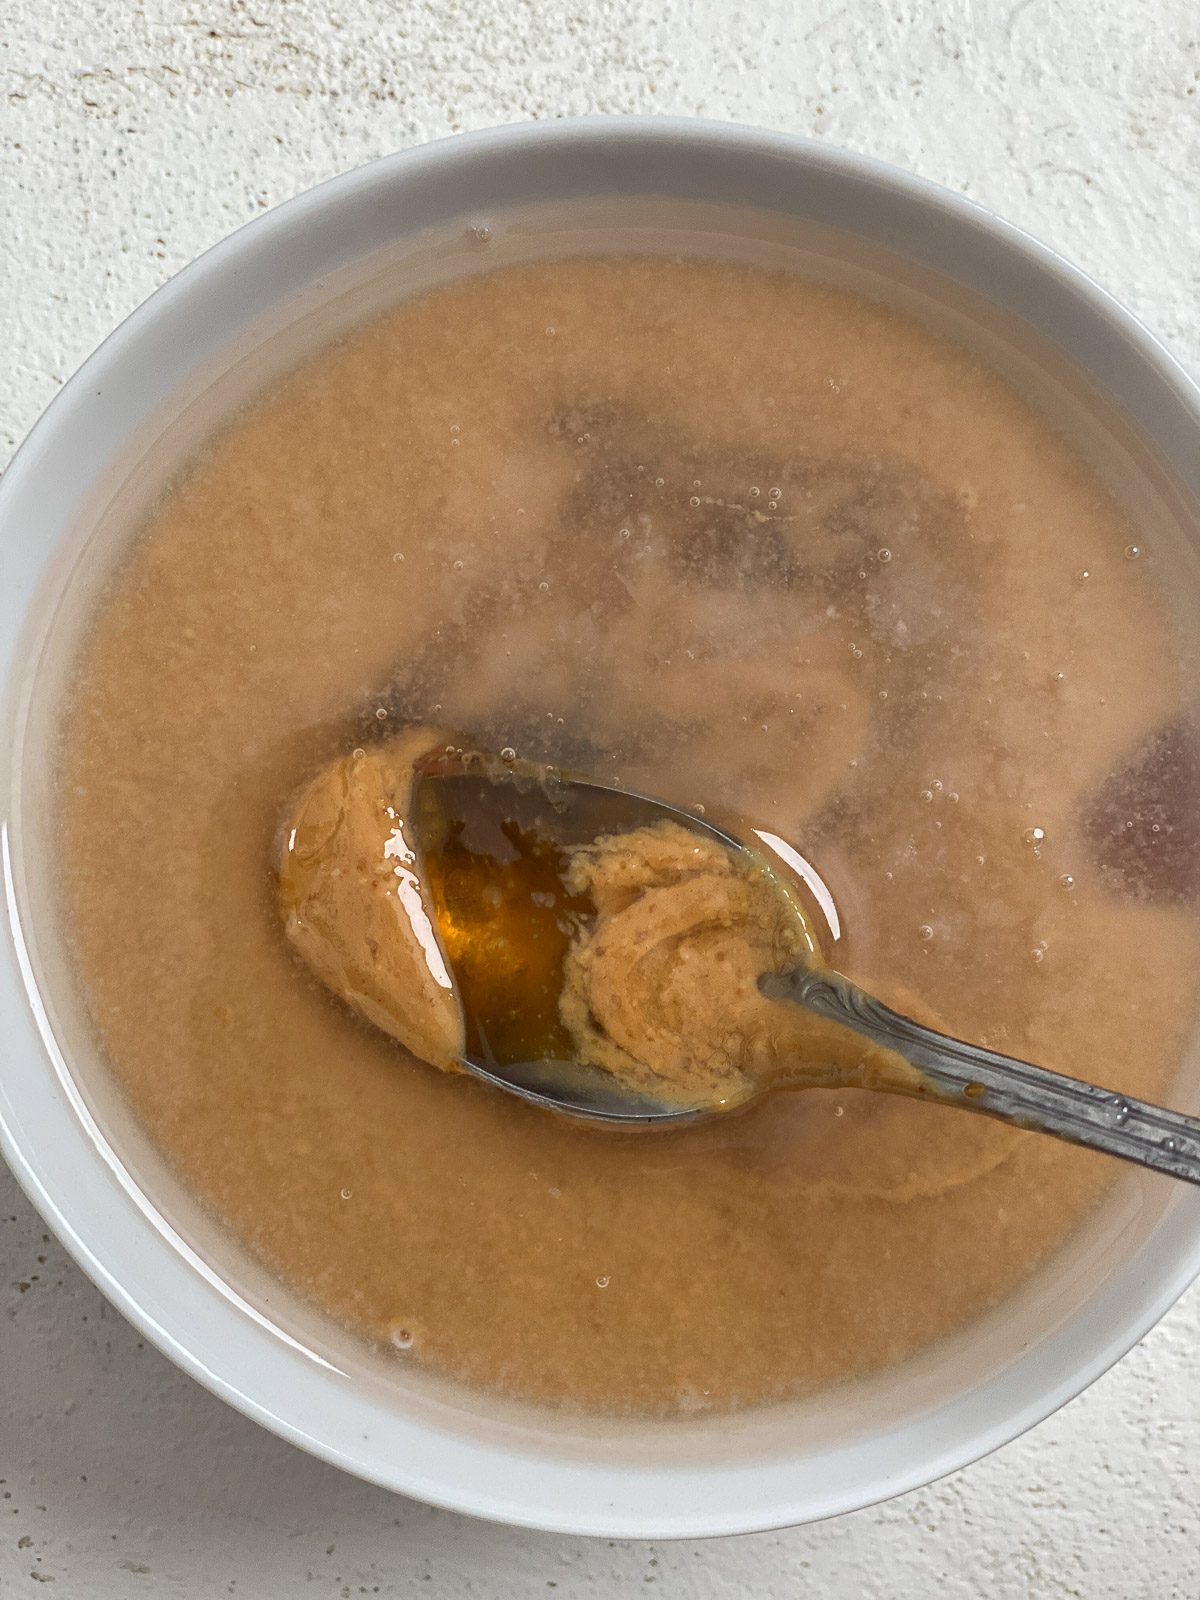 process of mixing ingredients for Simple Vegan Caramel in a white bowl